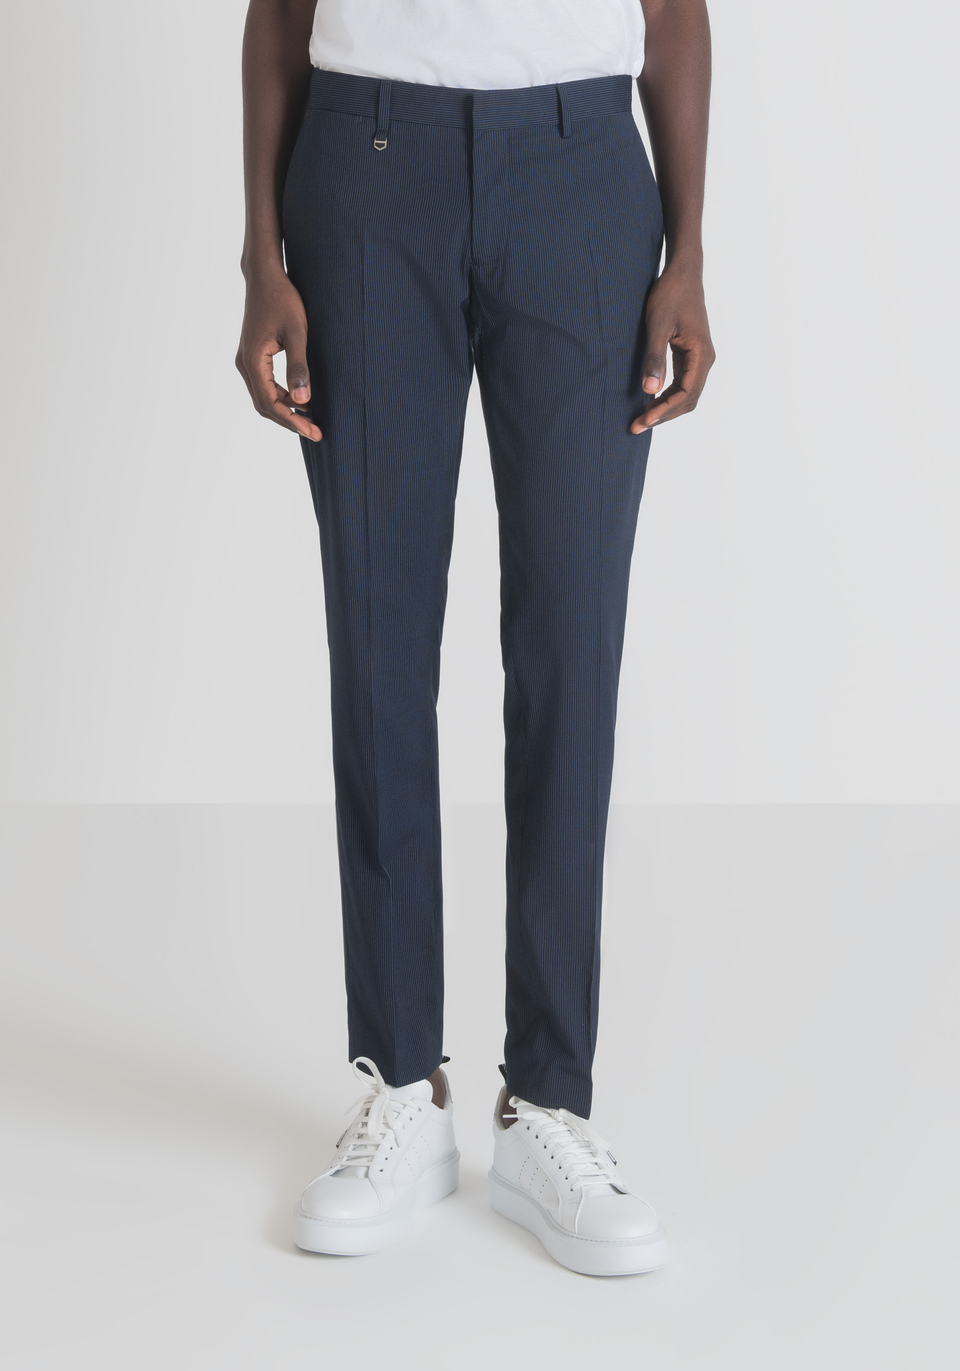 "BONNIE" SLIM-FIT TROUSERS IN STRETCH FABRIC WITH MICRO-WEAVE - Antony Morato Online Shop